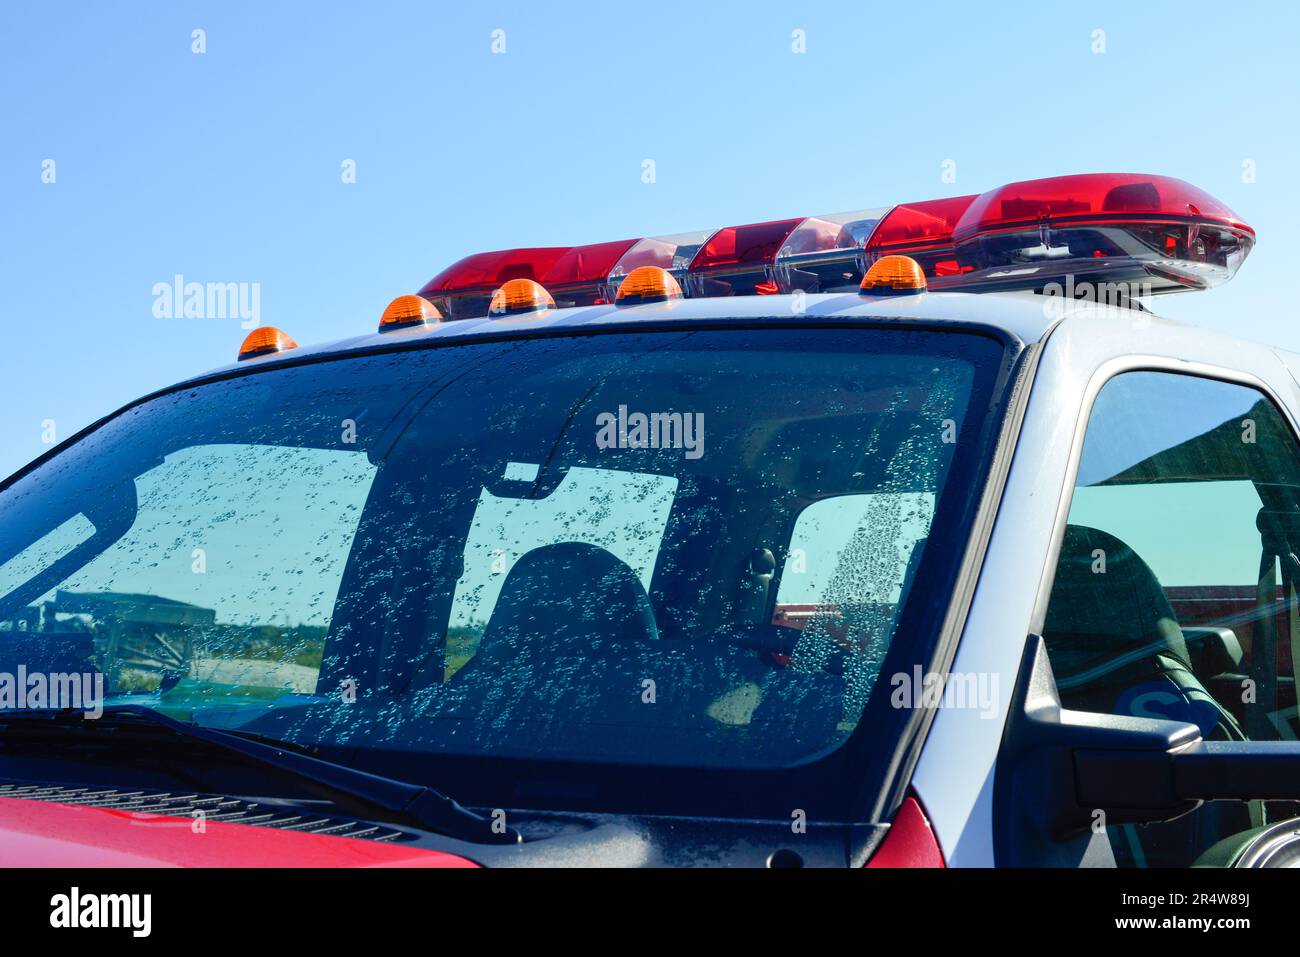 A red emergency firetruck with a lightbar on the roof. The lights are red, orange, and white color. The rescue pick-up truck has a white roof. Stock Photo